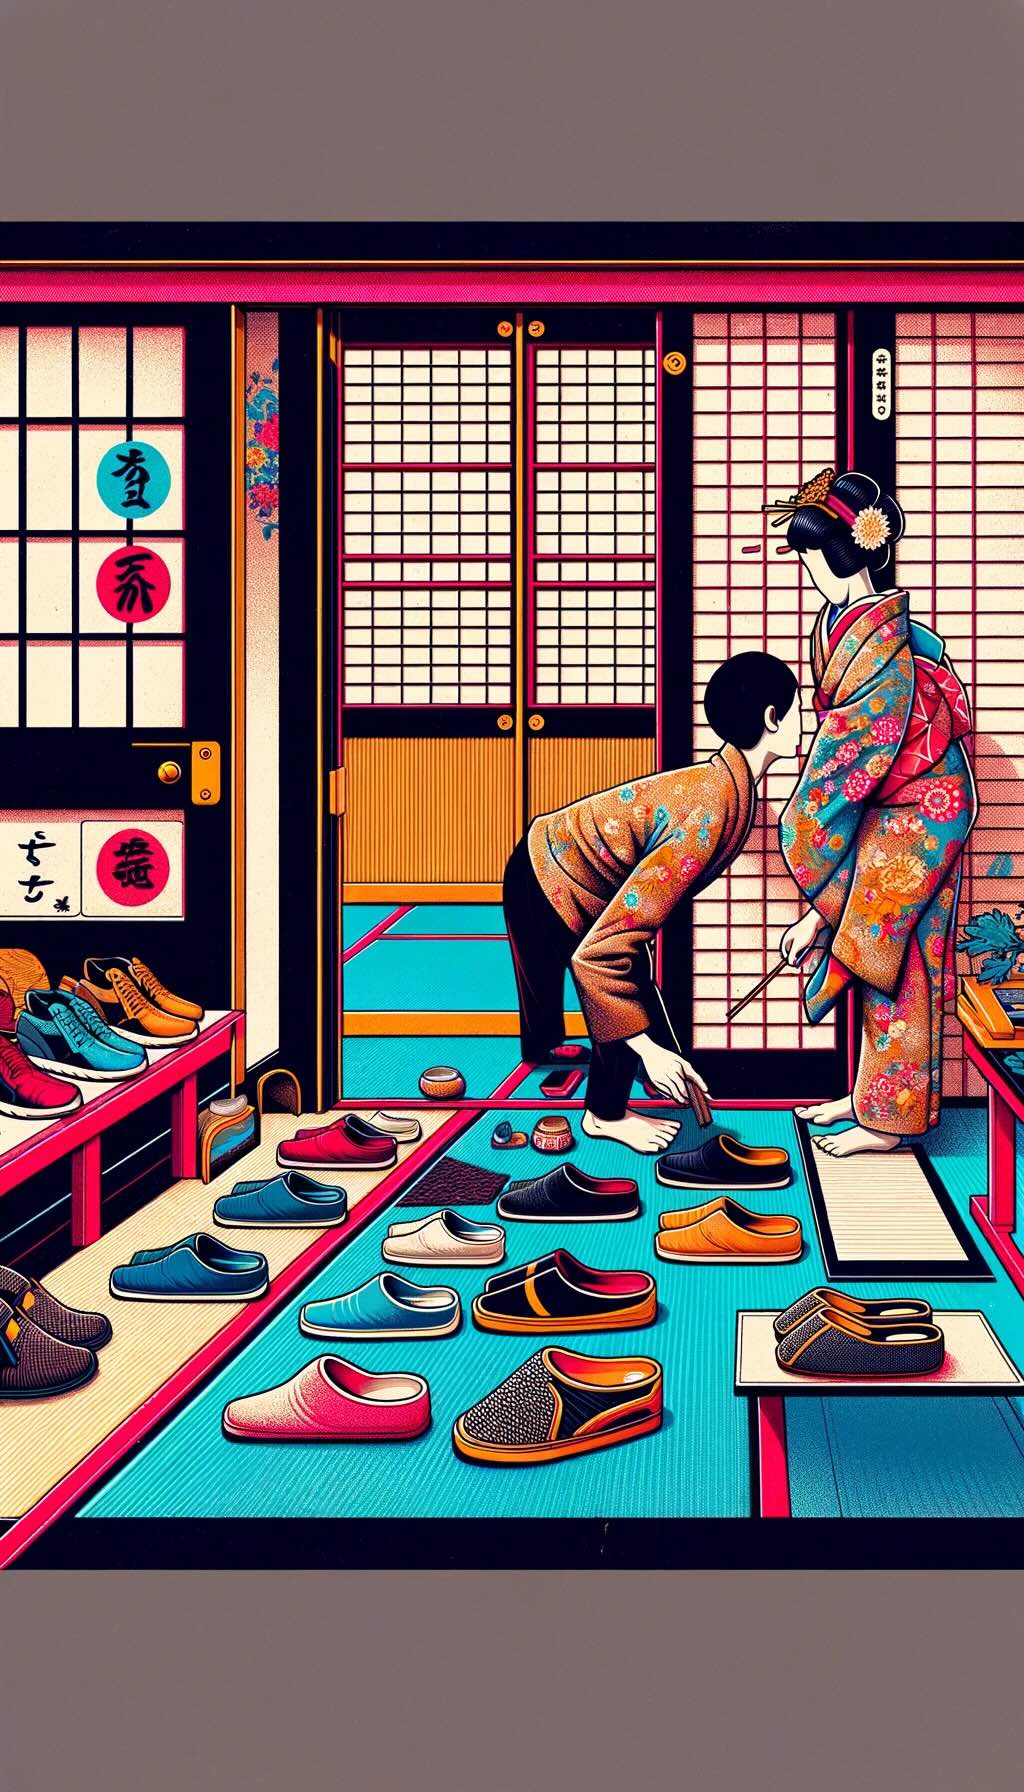 Proper etiquette of shoe removal in Japanese culture. It depicts scenes in a genkan (entryway), showing the careful removal and neat placement of shoes facing the door, and the use of slippers for indoor areas. Elements demonstrating the respect and mindfulness involved in this process are included, as well as the use of special slippers like guest slippers and toilet slippers. The modern and abstract style emphasizes the significance of this etiquette in Japanese customs and the attention to detail required in this practice.